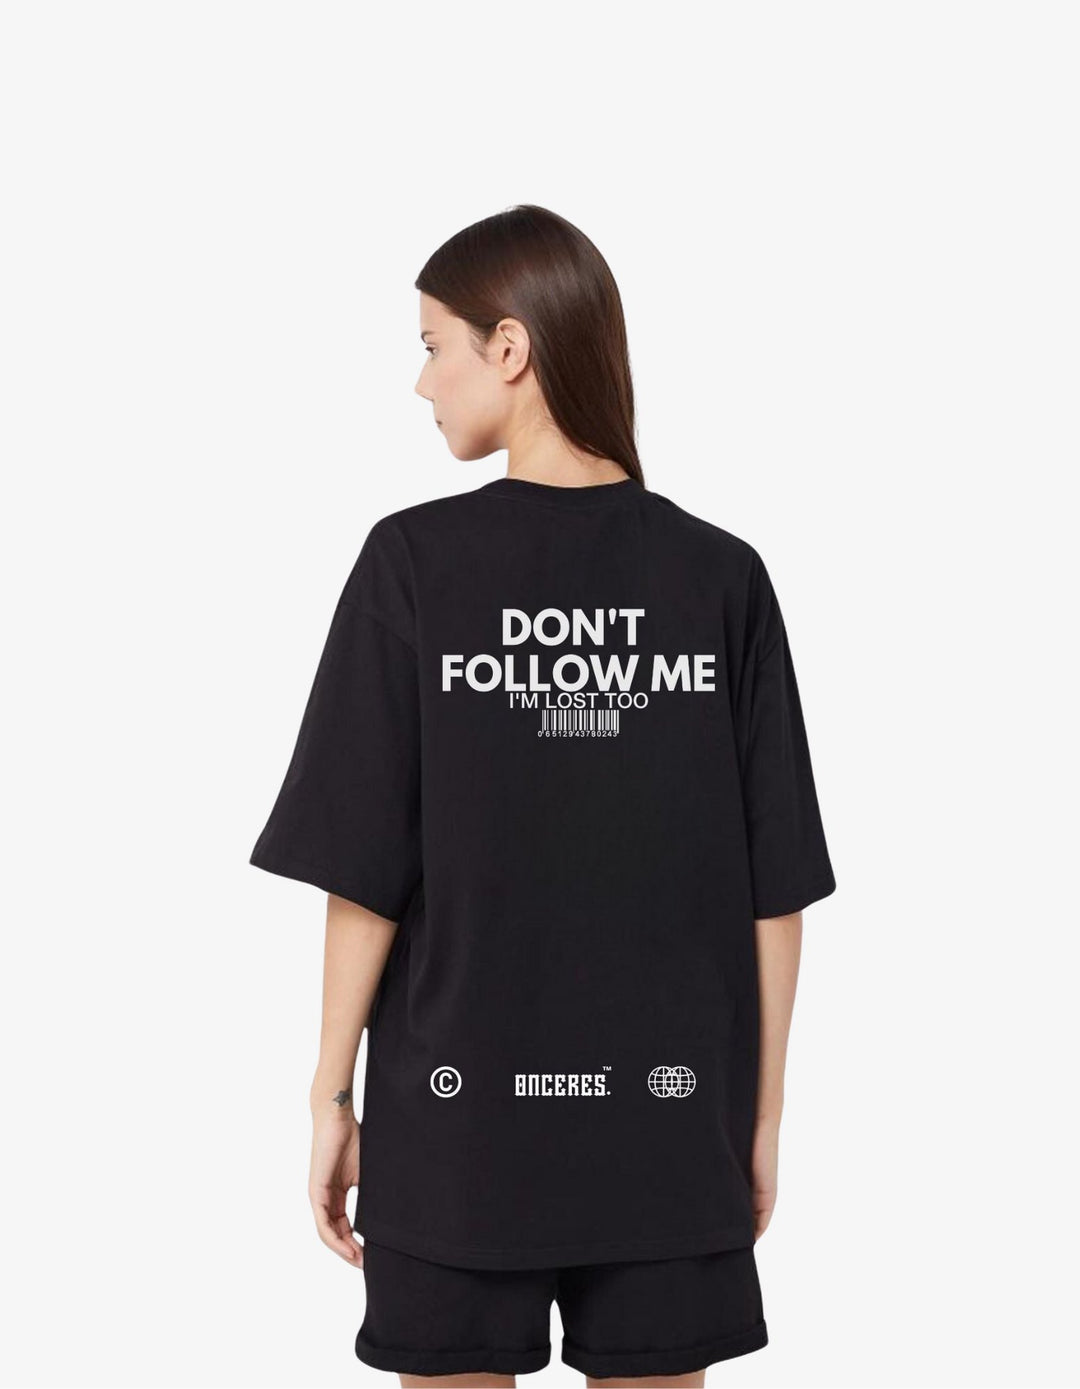 Don't Follow me - Onceres™